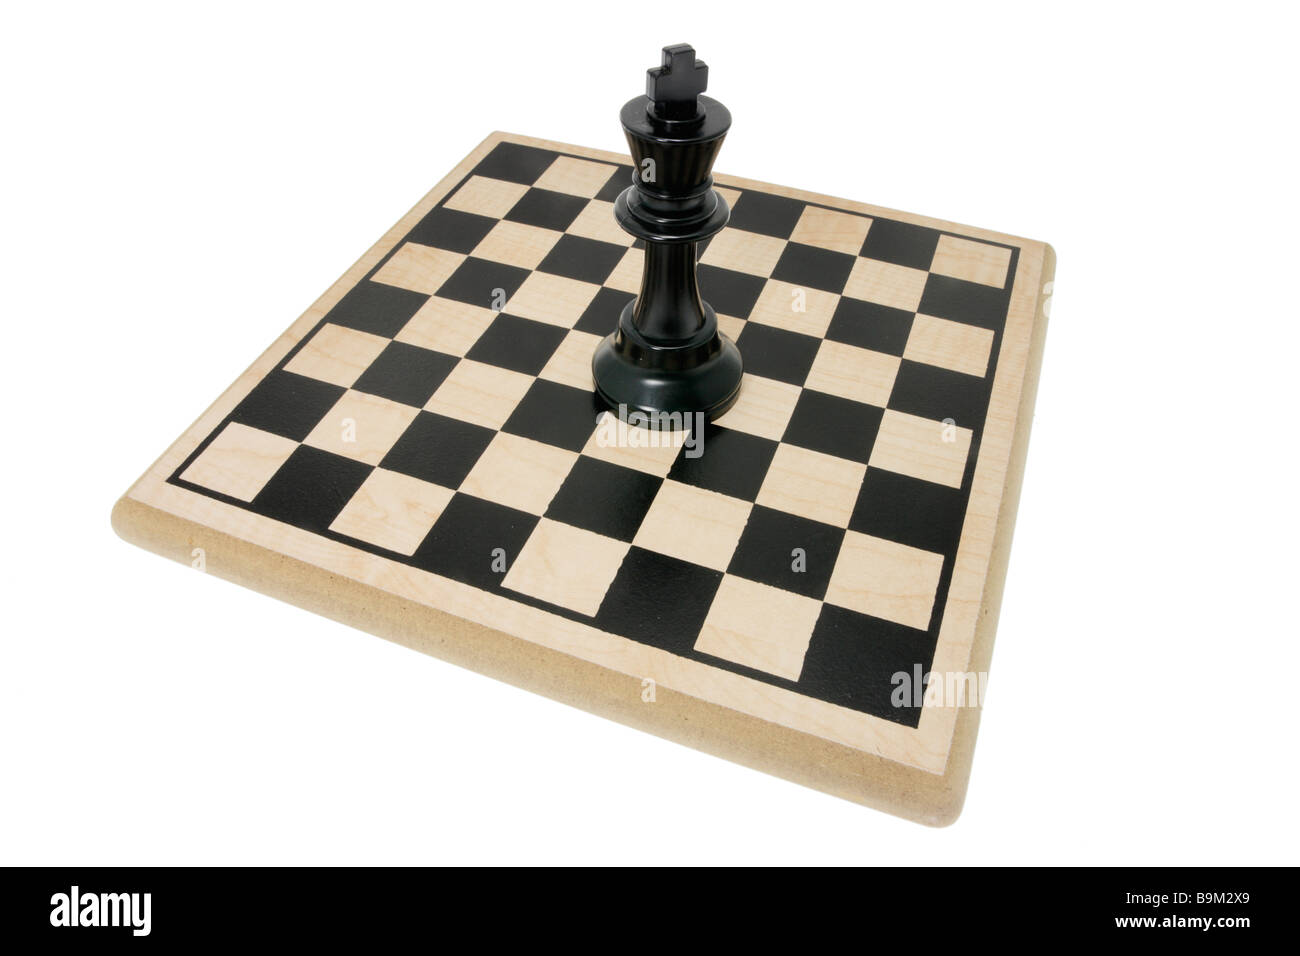 King Chess Piece on Chess Board Stock Photo